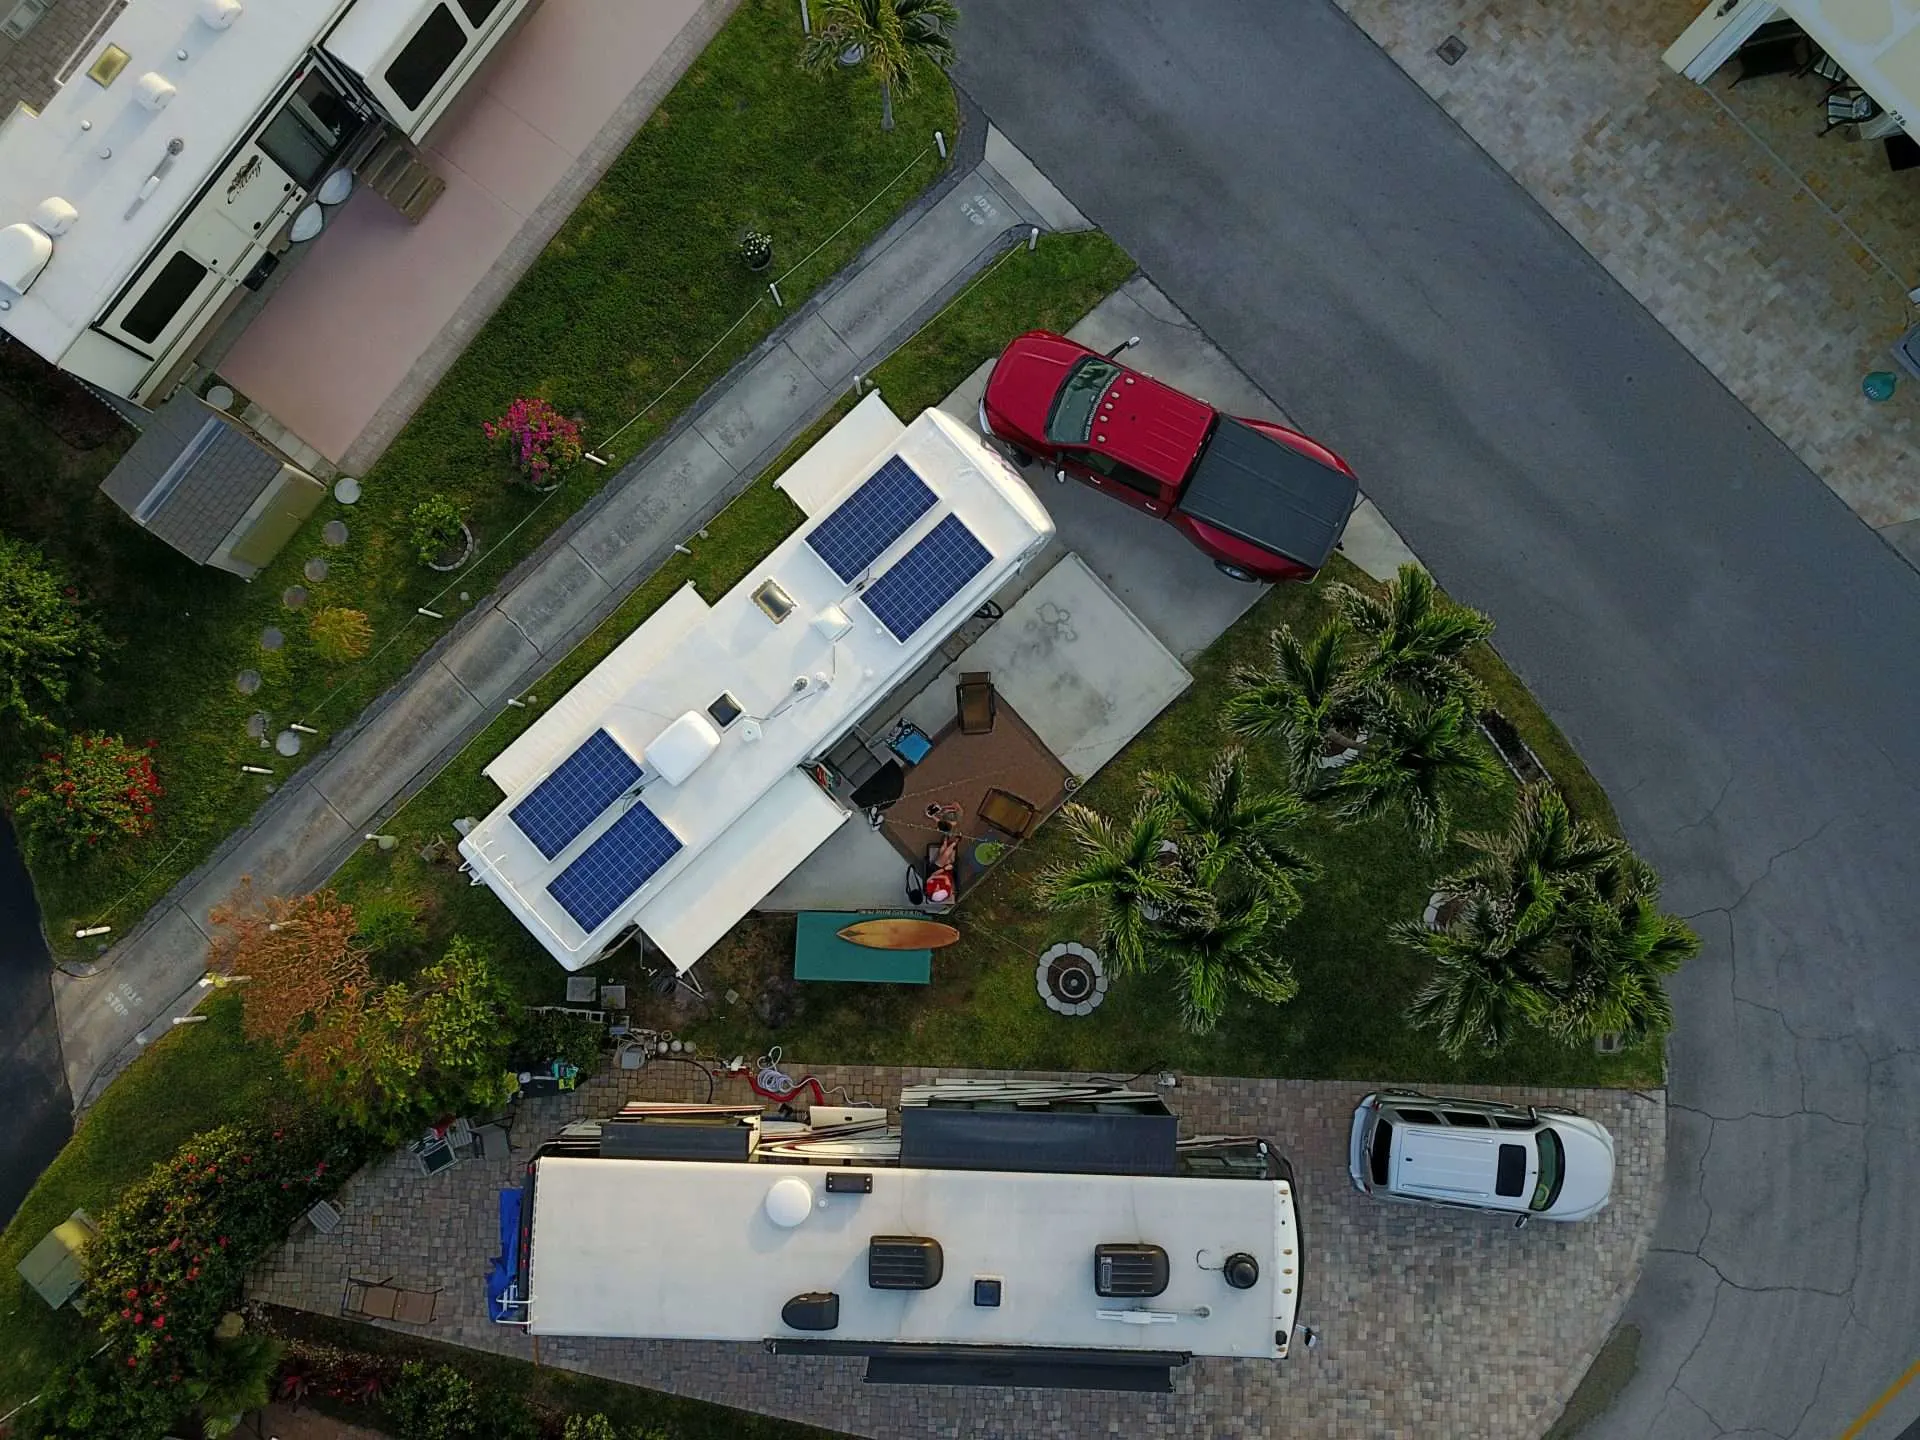 Aerial image of RV parked in a driveway with solar panels installed